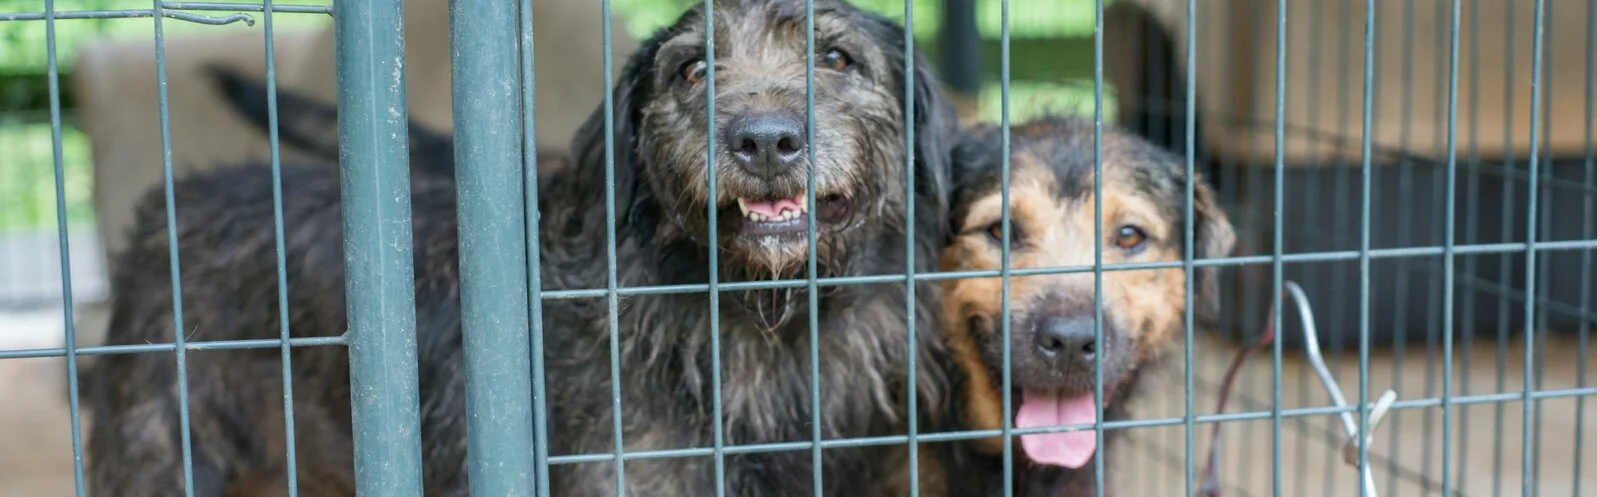 Two long-haired dogs behind cage